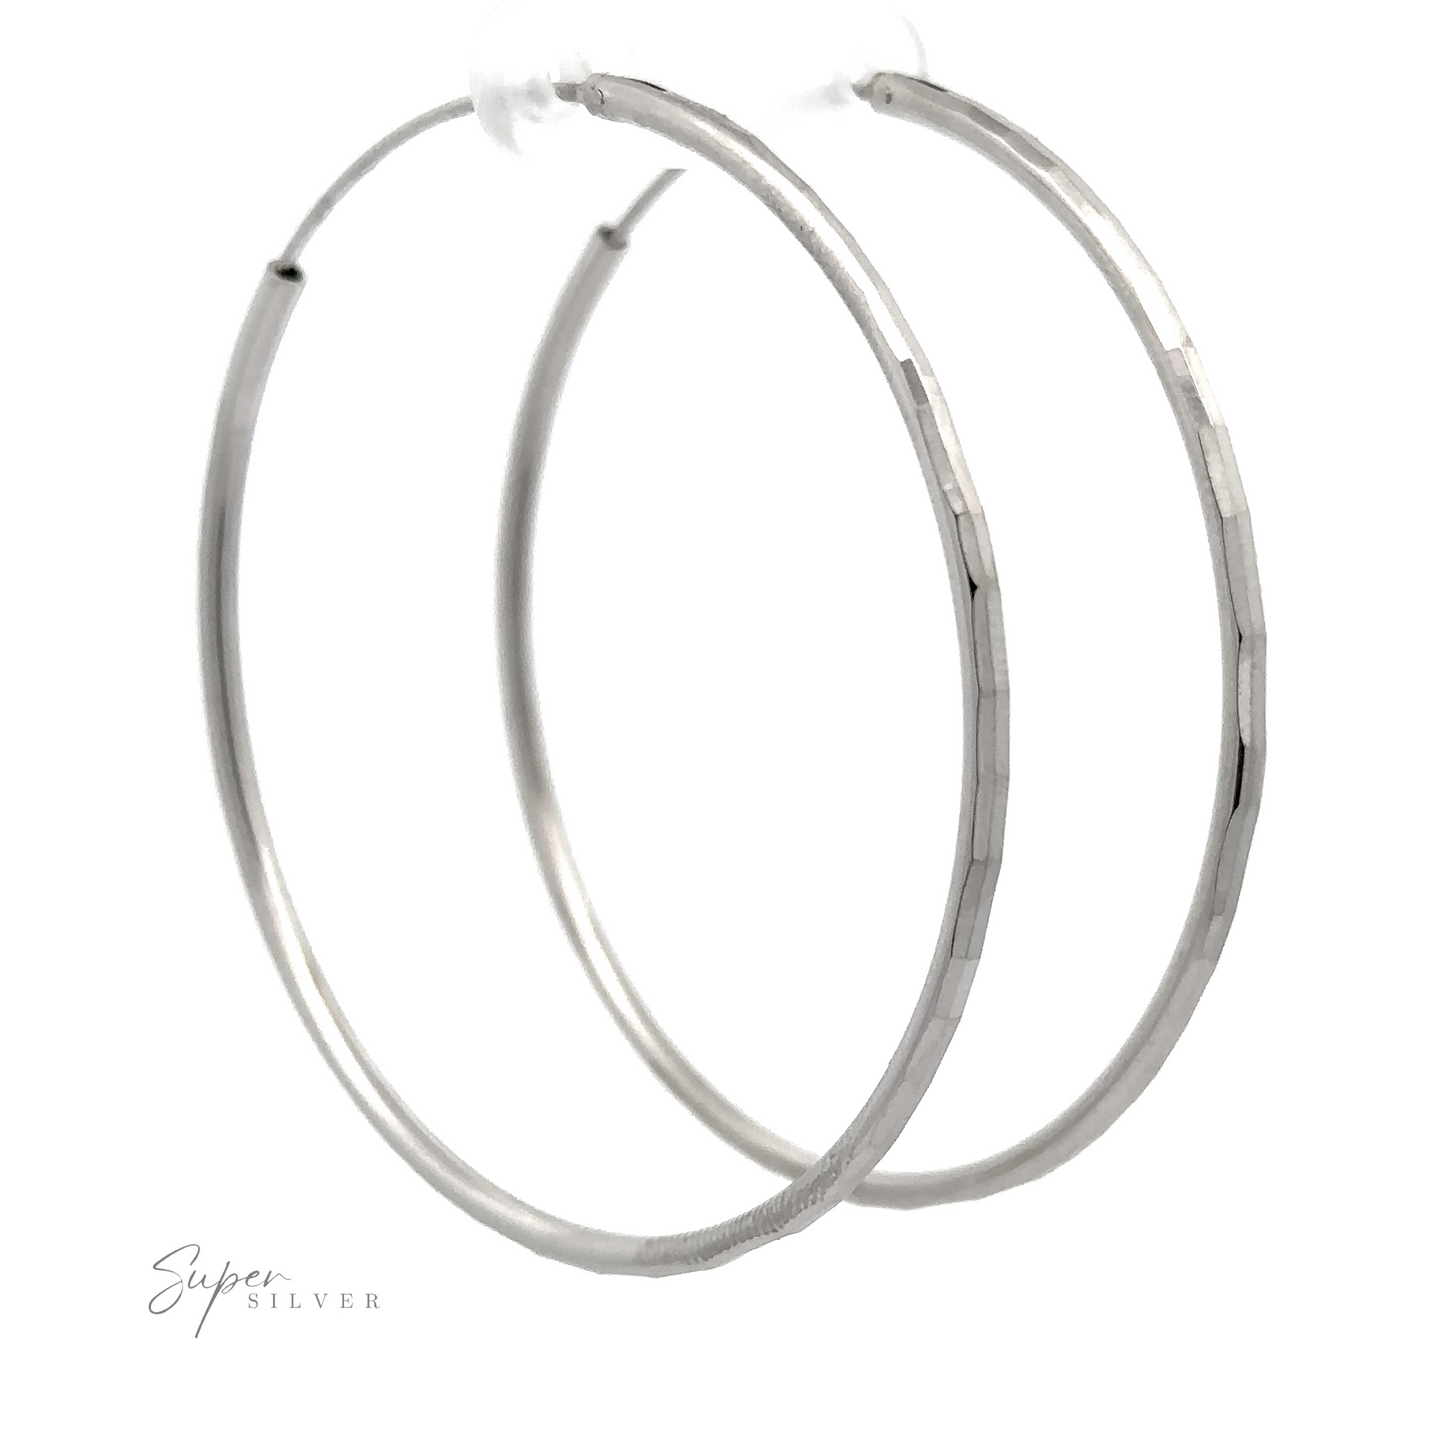 
                  
                    A pair of 2mm Diamond Cut Hoop Earrings with a diamond faceted texture, displayed against a white background with a faint "super silver" signature at the bottom left.
                  
                